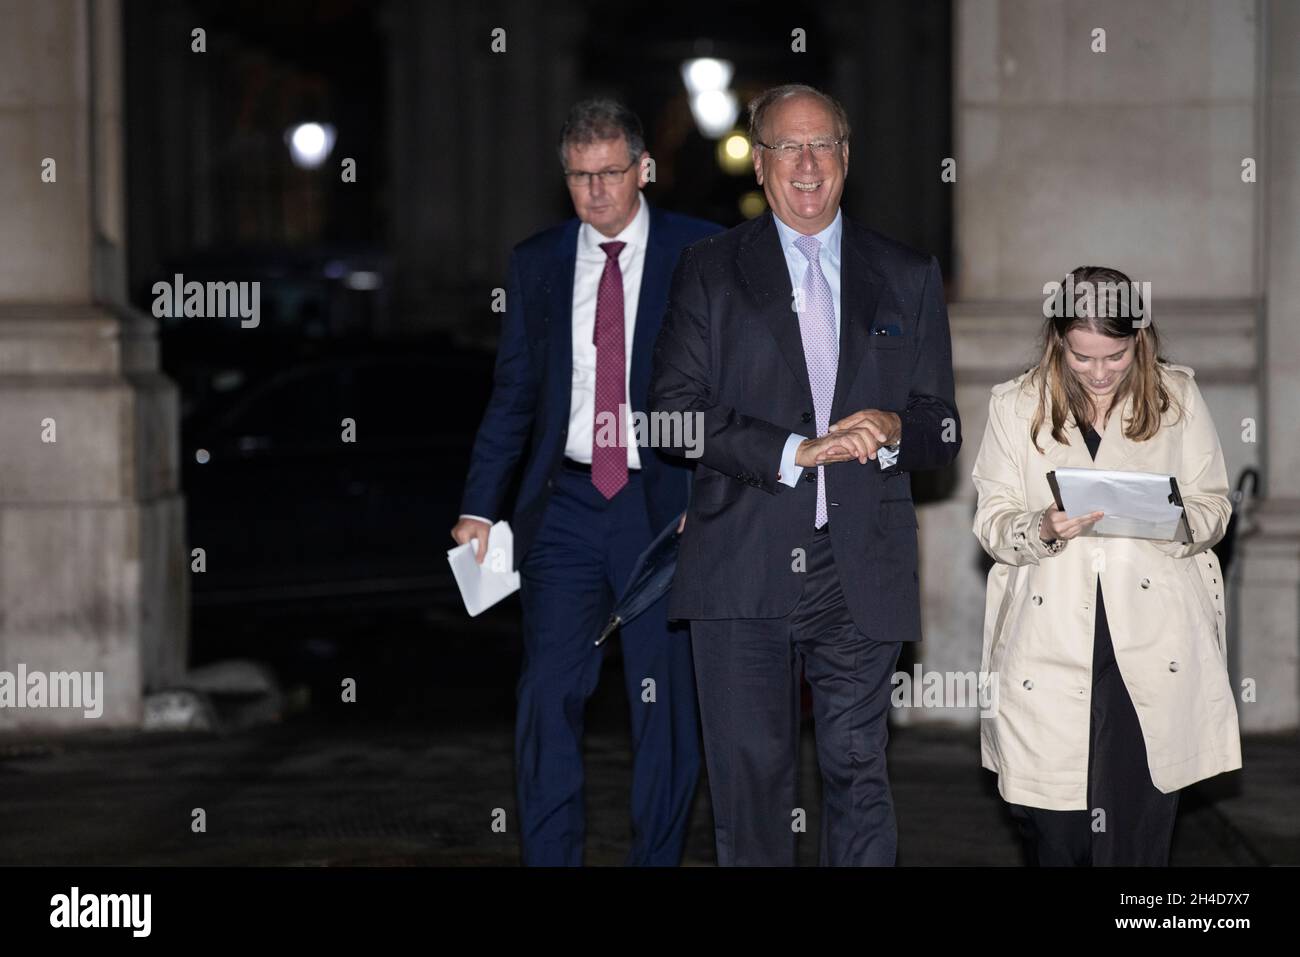 Prime Minister invites world’s top business leaders including BlackRock CEO Larry Fink to Downing Street in bid to establish 'Global Britain'. Stock Photo